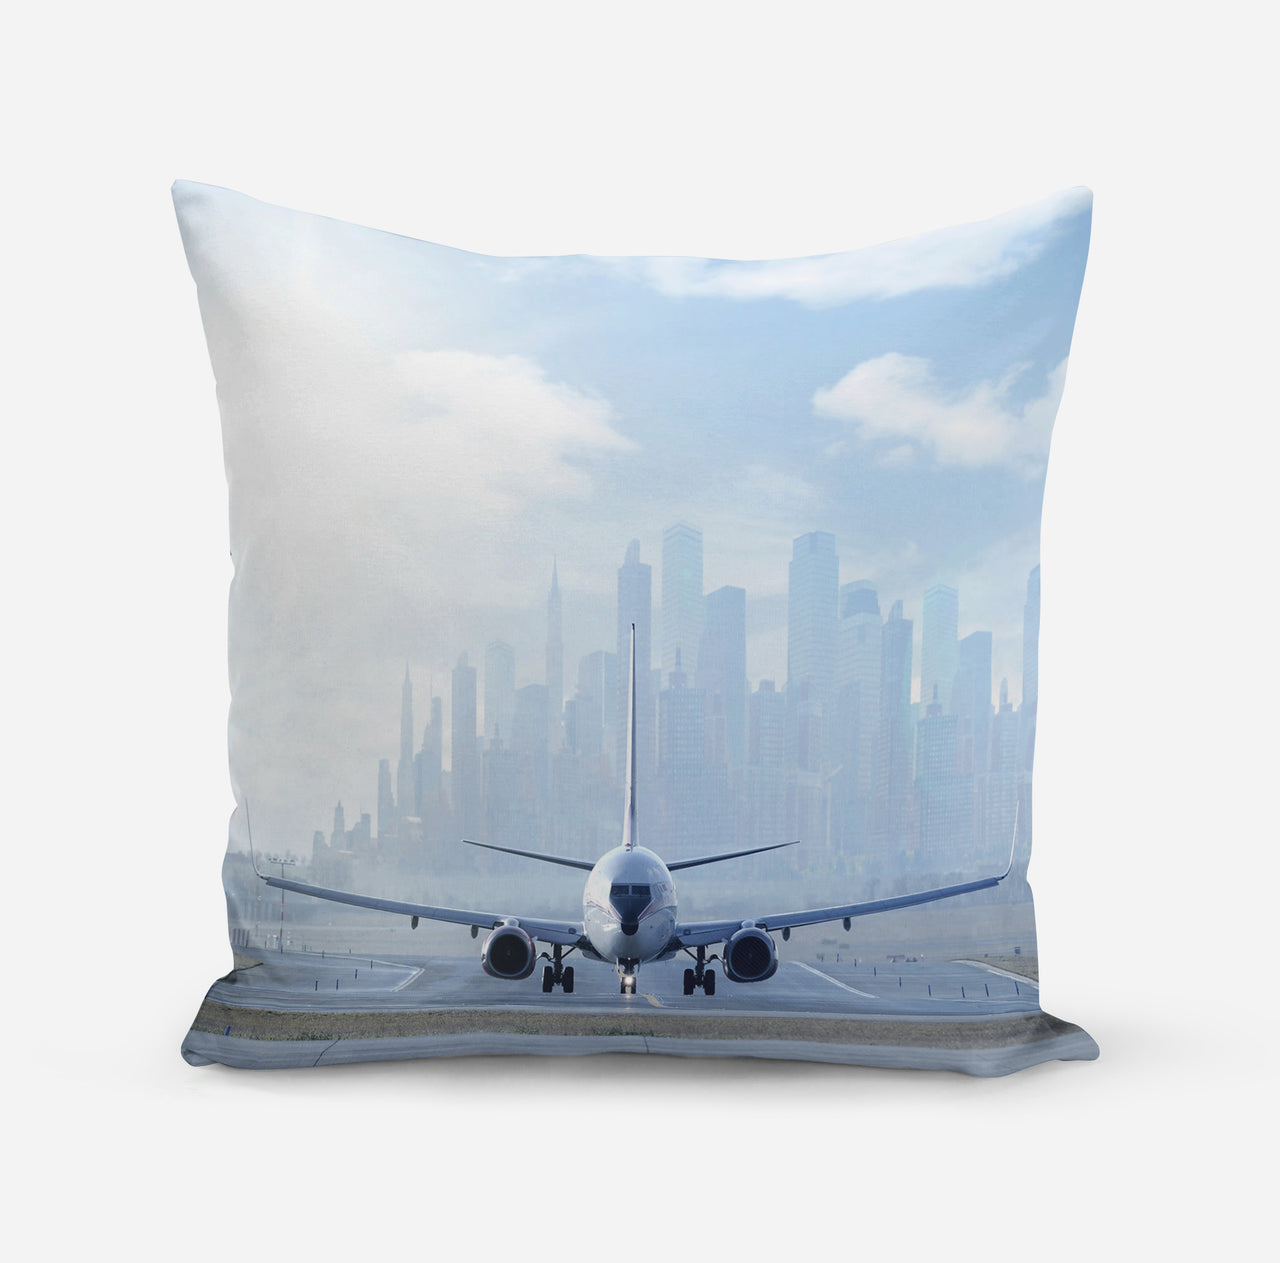 Boeing 737 & City View Behind Designed Pillows